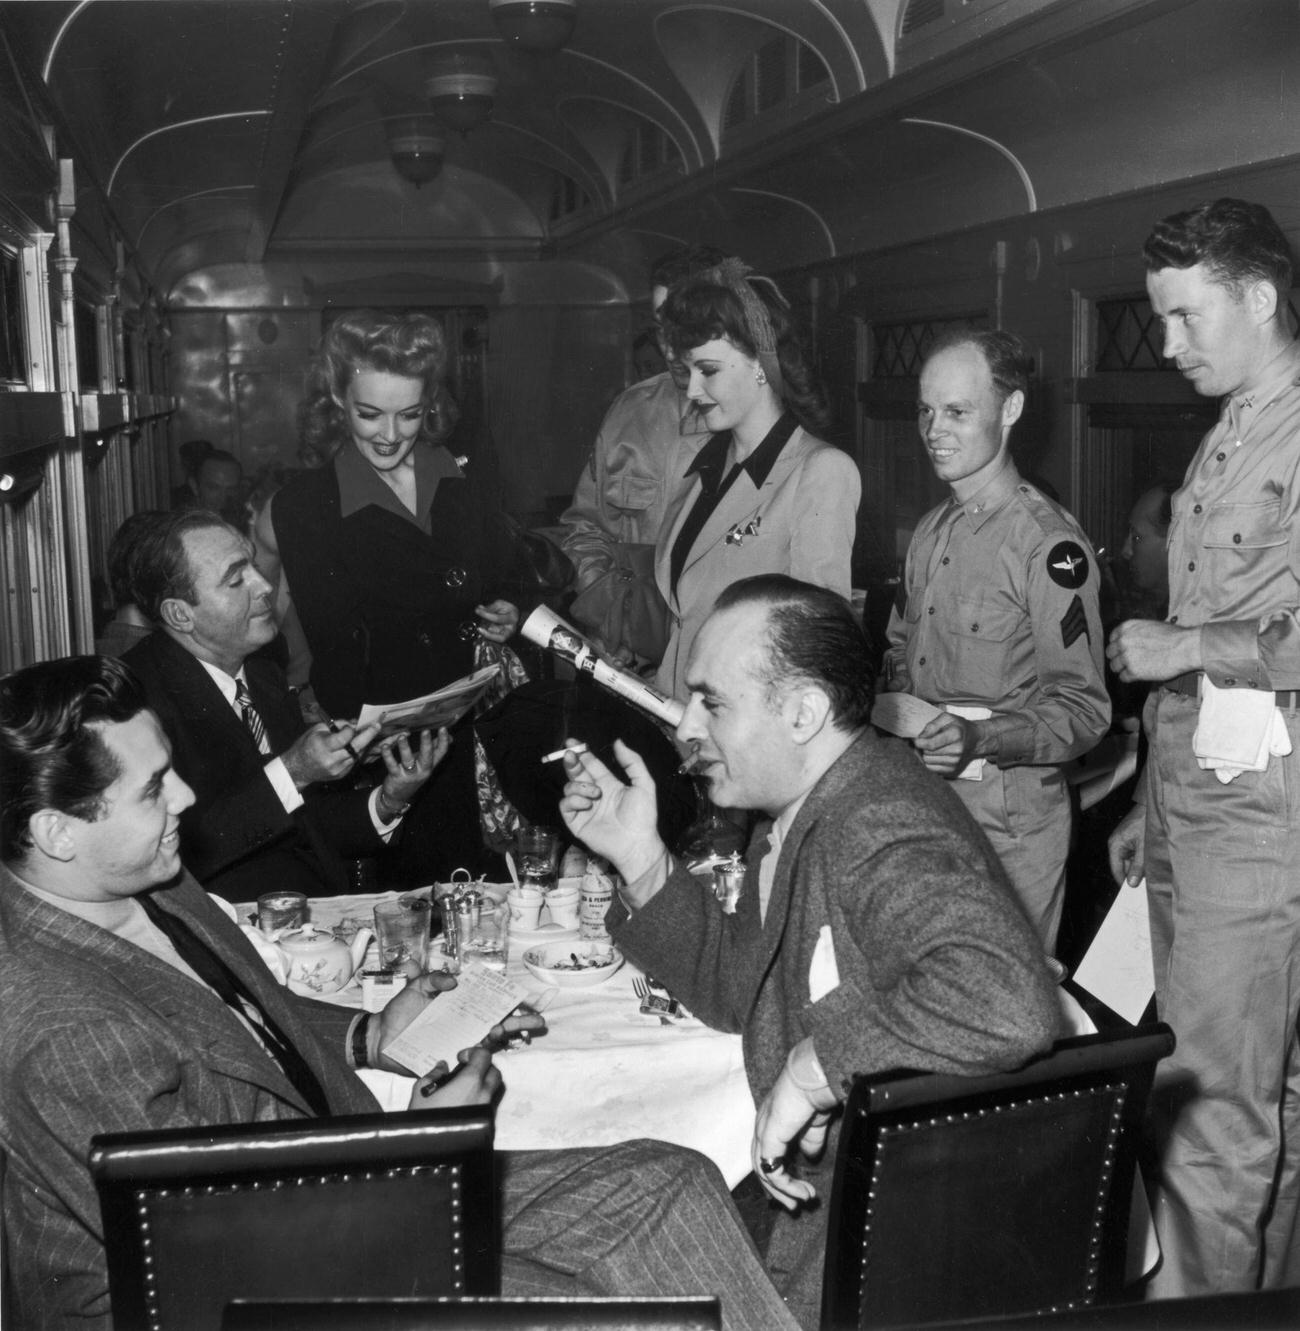 A group of actors chat around a table as three American servicemen look on, while traveling by train on the Hollywood Victory Caravan.